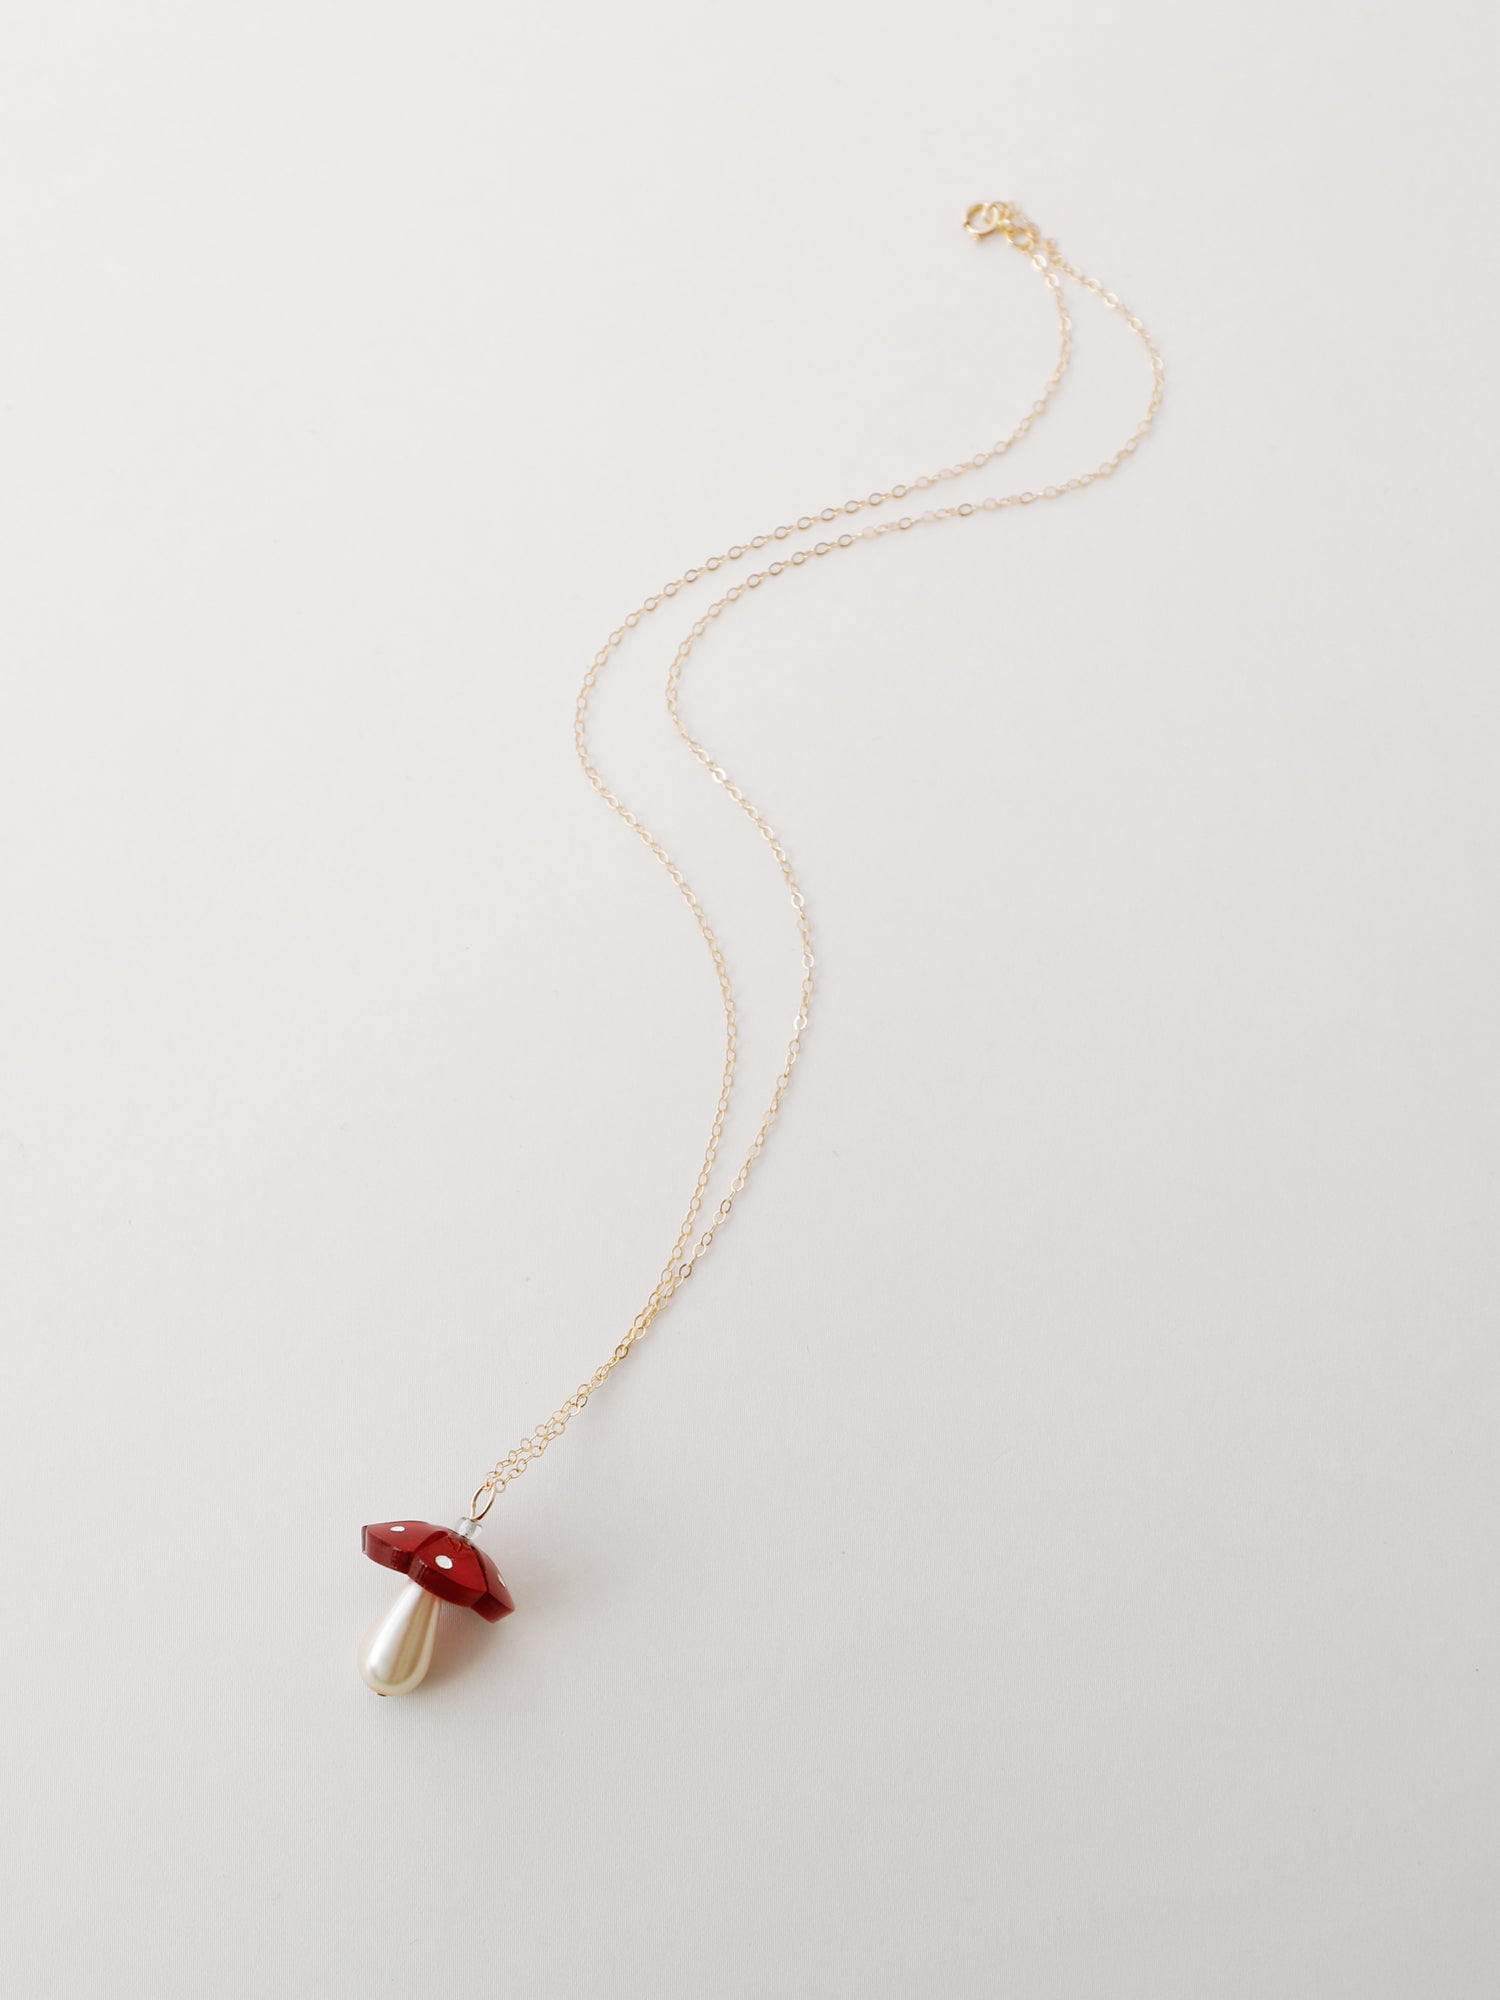 Red mushroom pendant necklace. Made from heat-formed acrylic with hand-inked details and finished off with a high quality Czech glass pearl. Pendant is hung on a high quality 50cm 14k gold-filled chain. Handmade in the UK by Wolf & Moon.